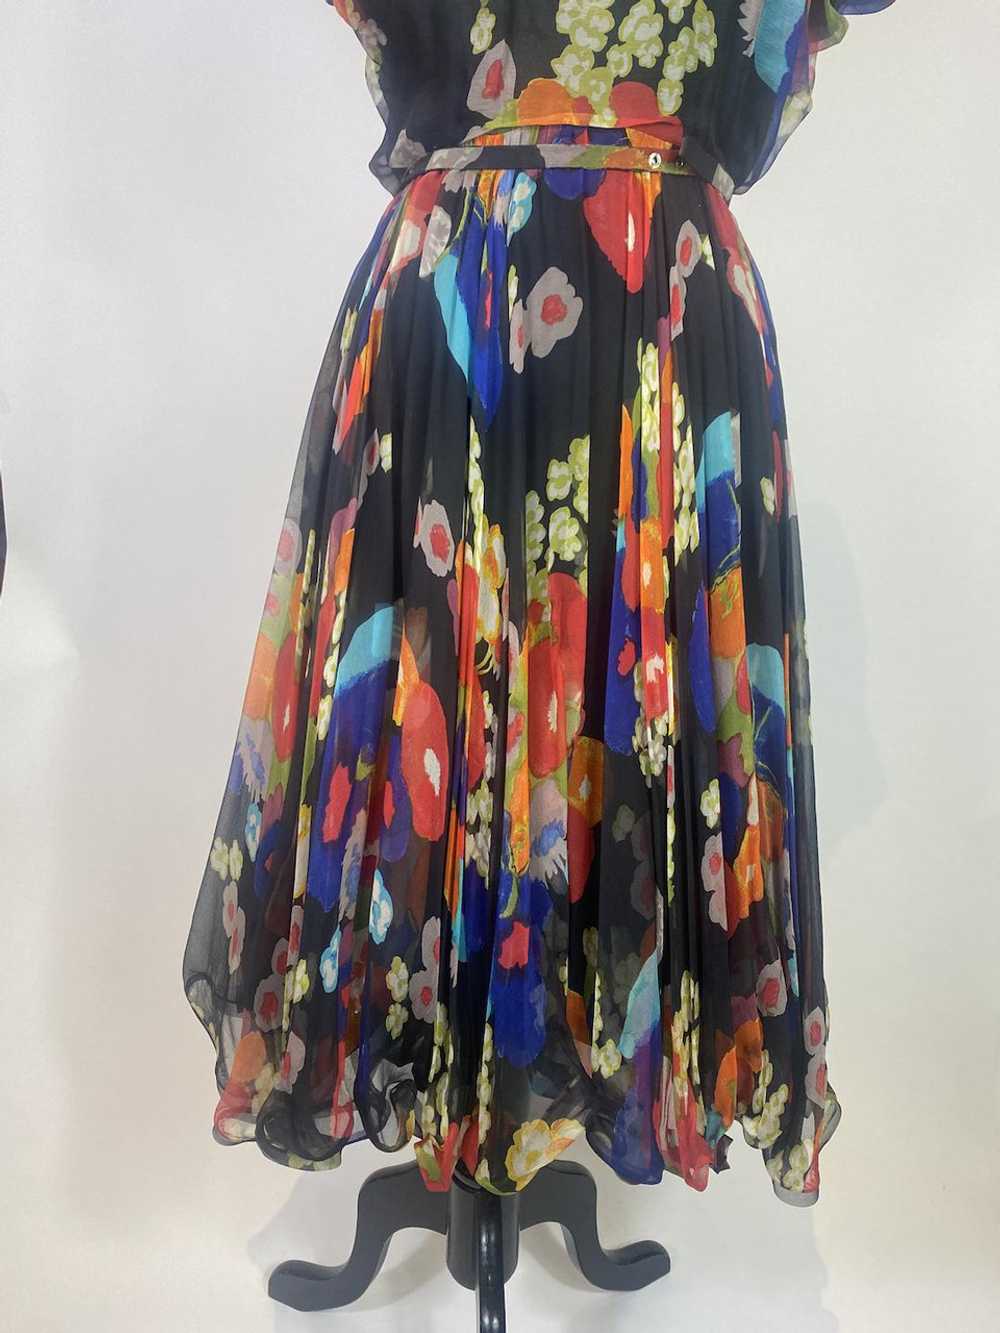 1950s - 1960s Silk Chiffon Floral Bow Front Dress - image 3